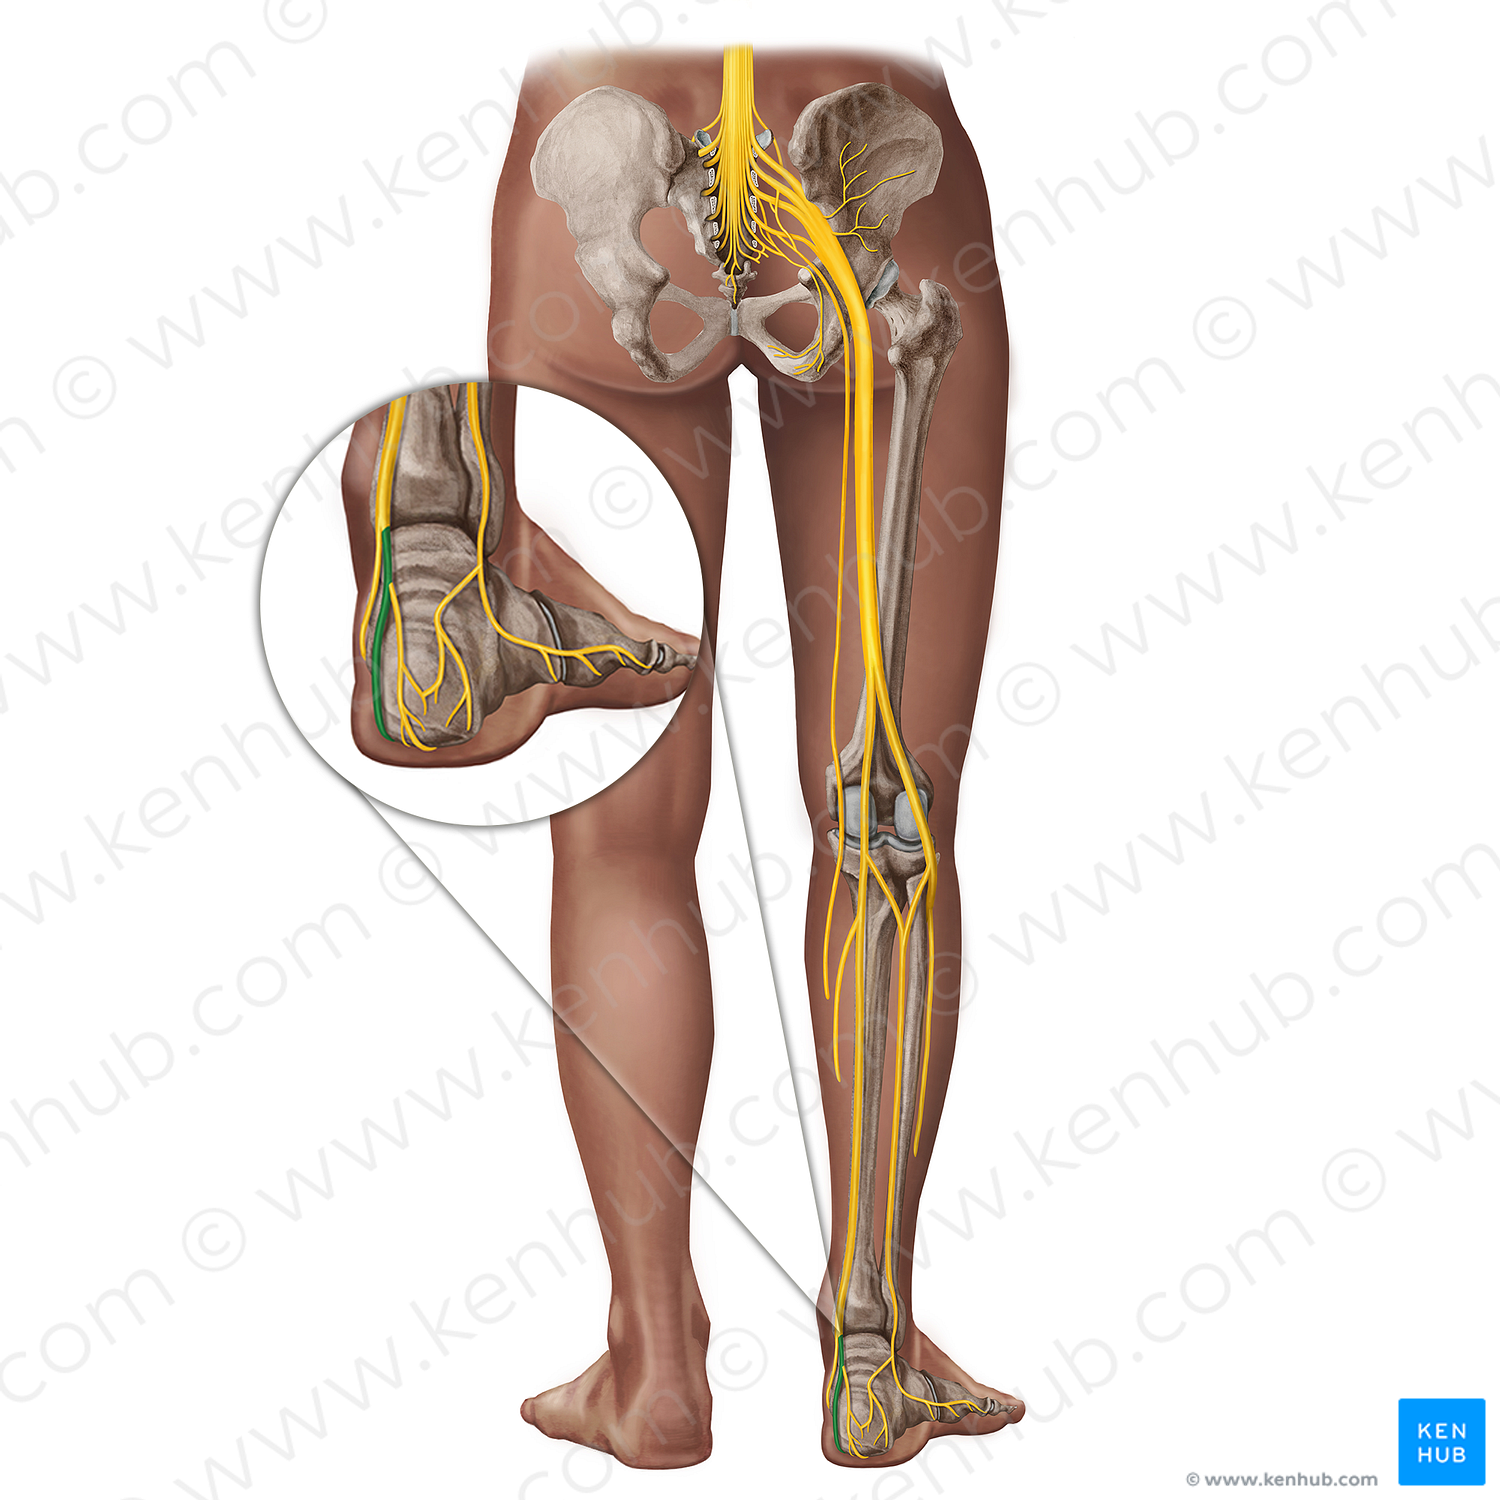 Lateral plantar nerve (#18283)